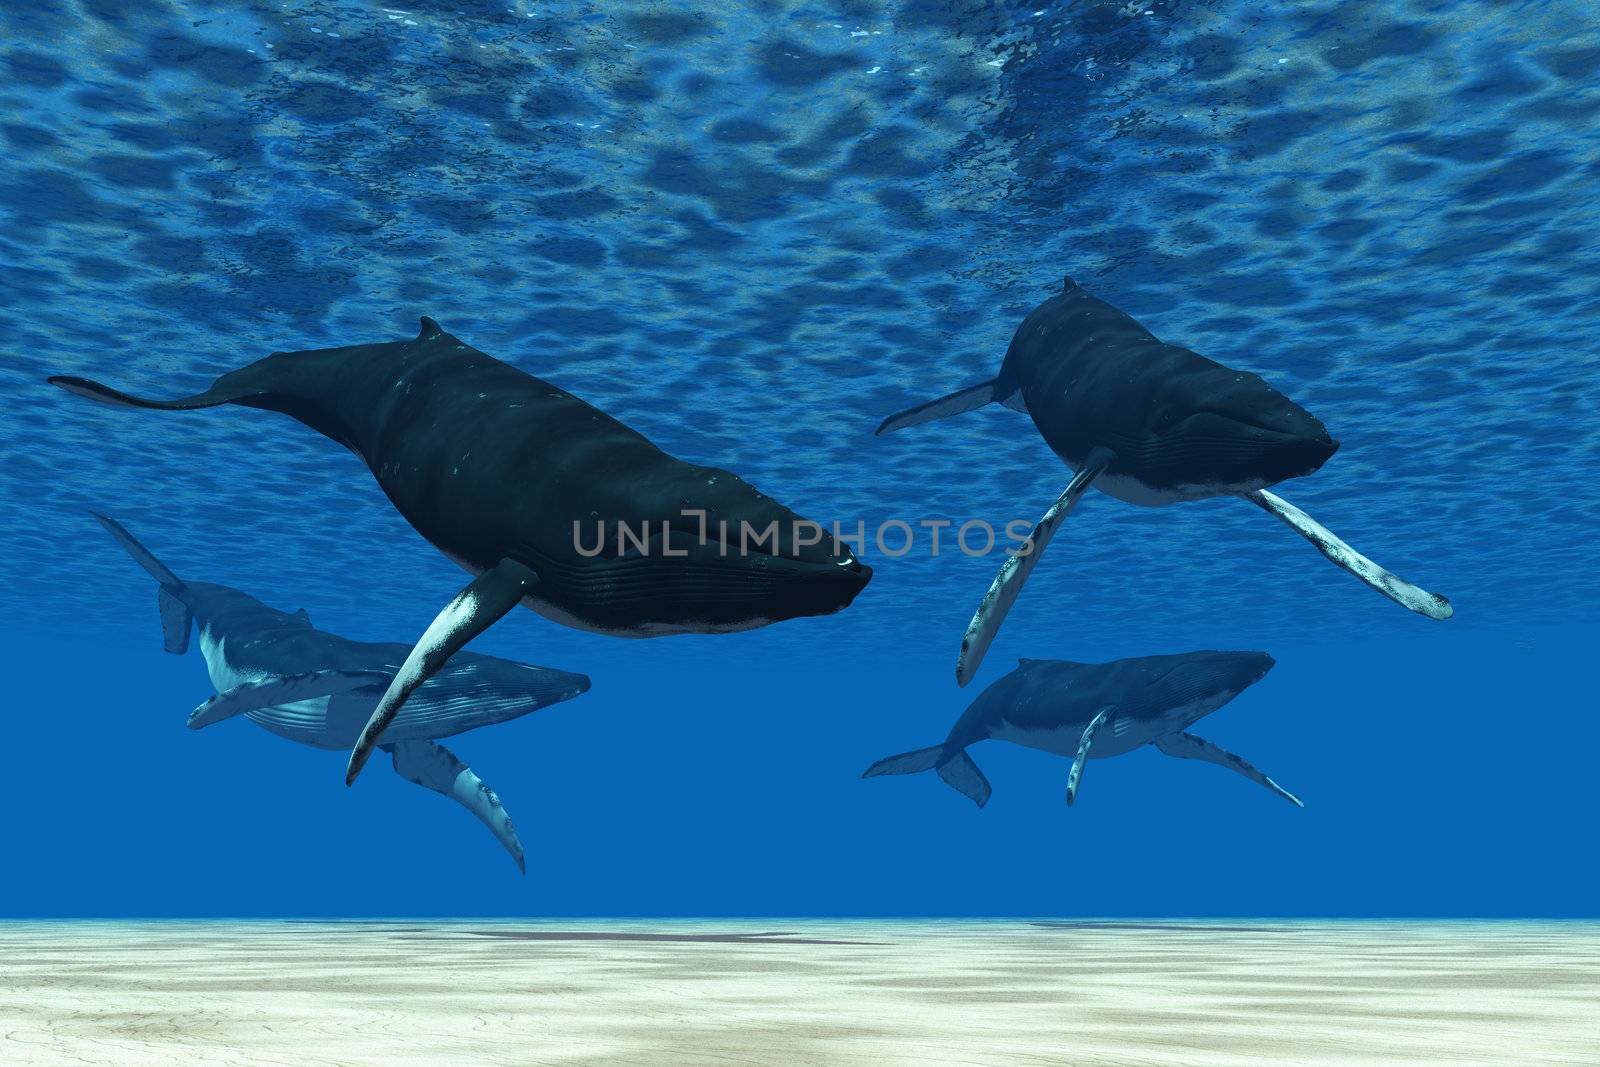 A group of Humpback whales swim in ocean shallows.